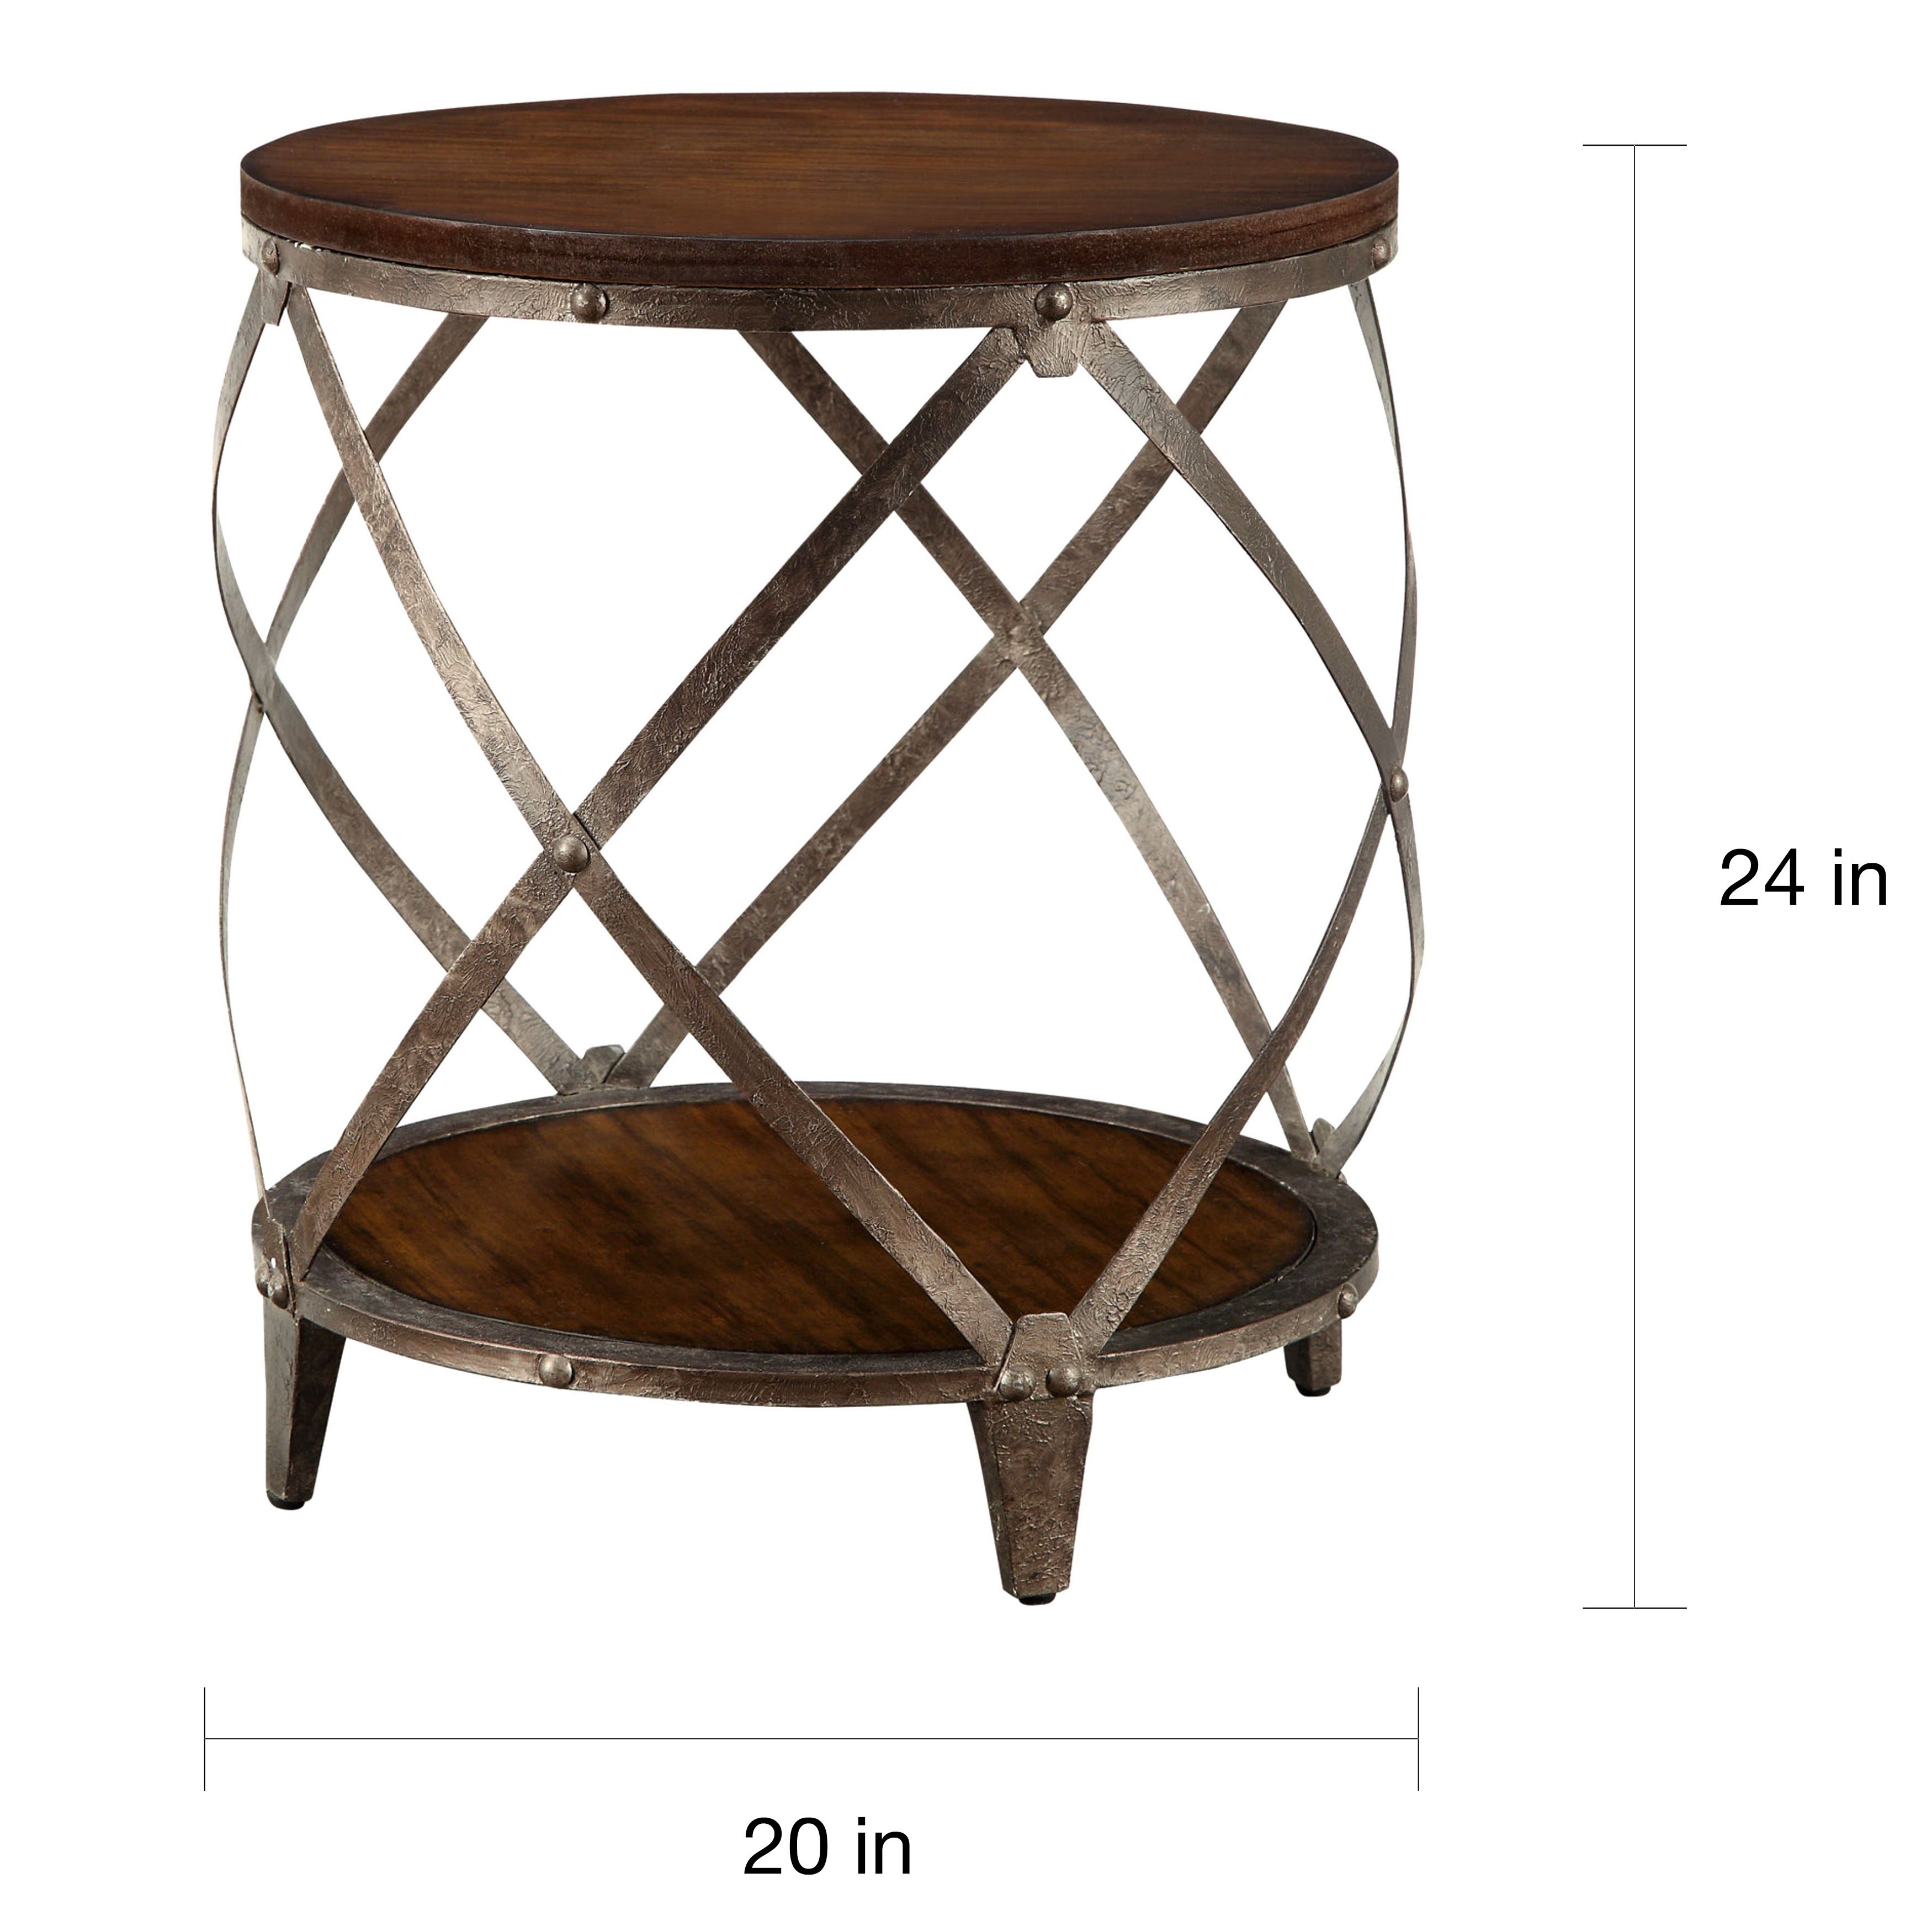 magnison distressed wood metal drum shape accent table free shipping today outdoor patio covers jcpenney sectional shower curtains long narrow desk unique umbrellas round end